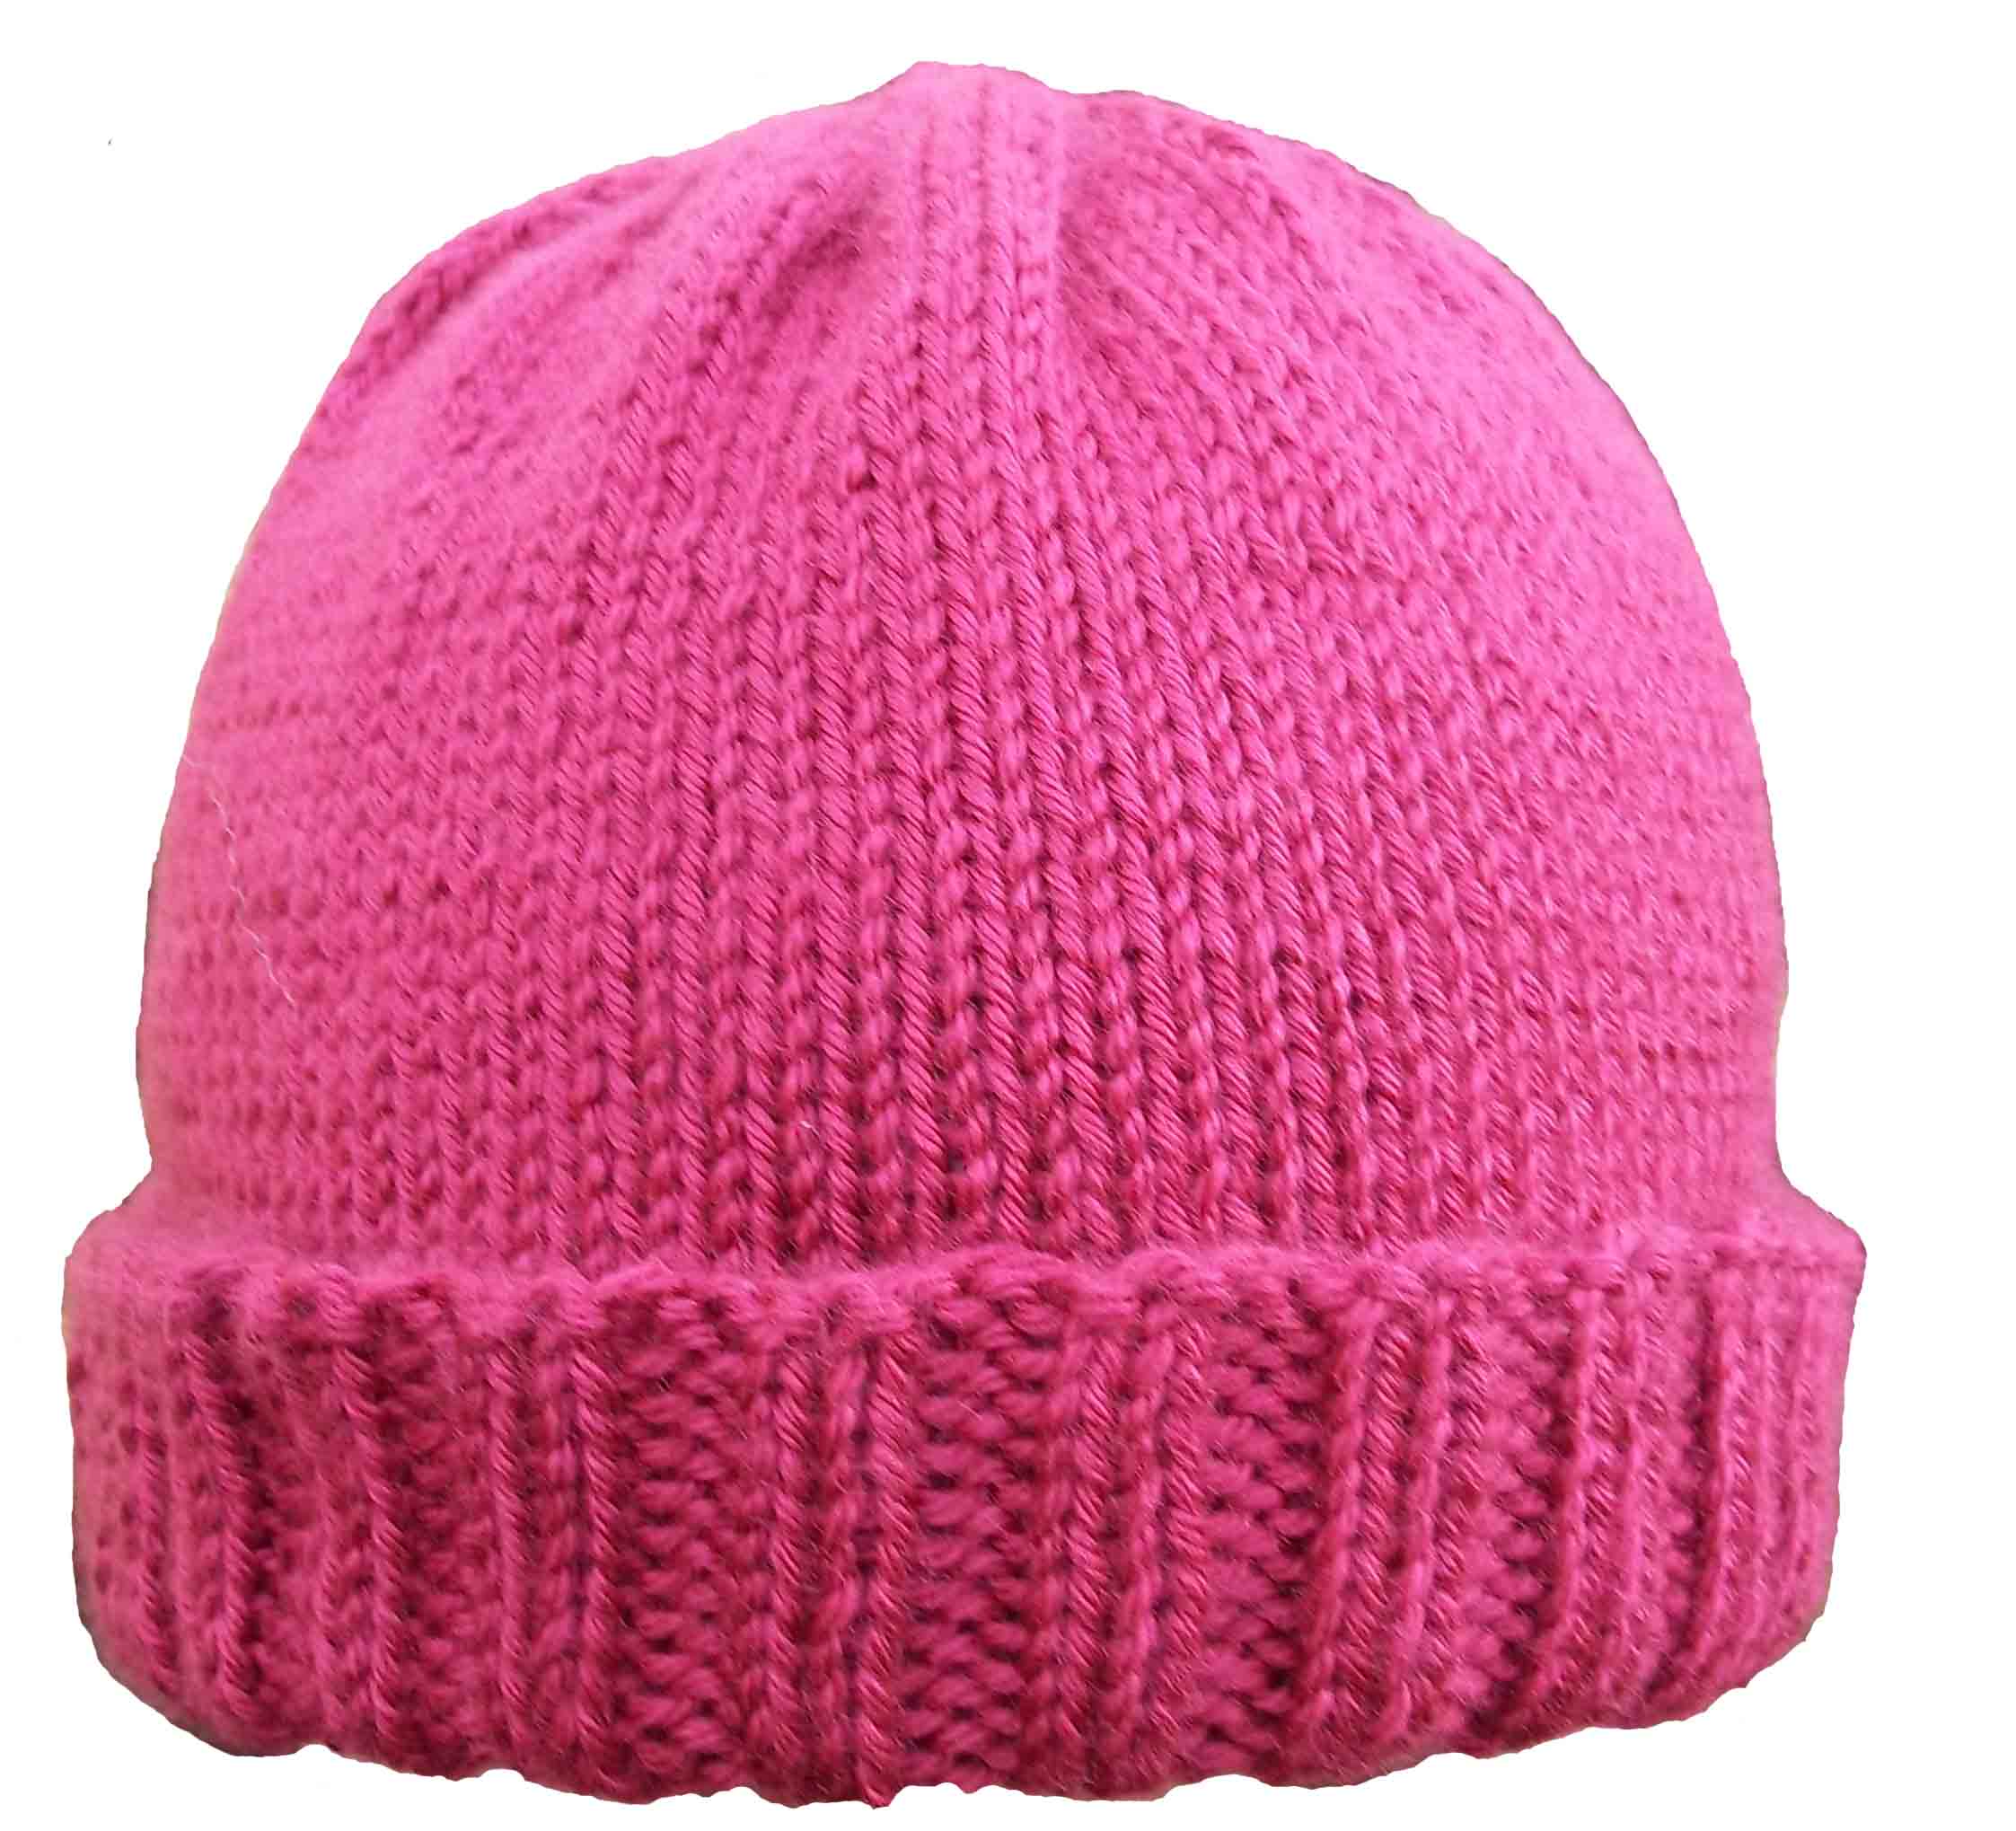 easy-knitted-hat-patterns-free-patterns